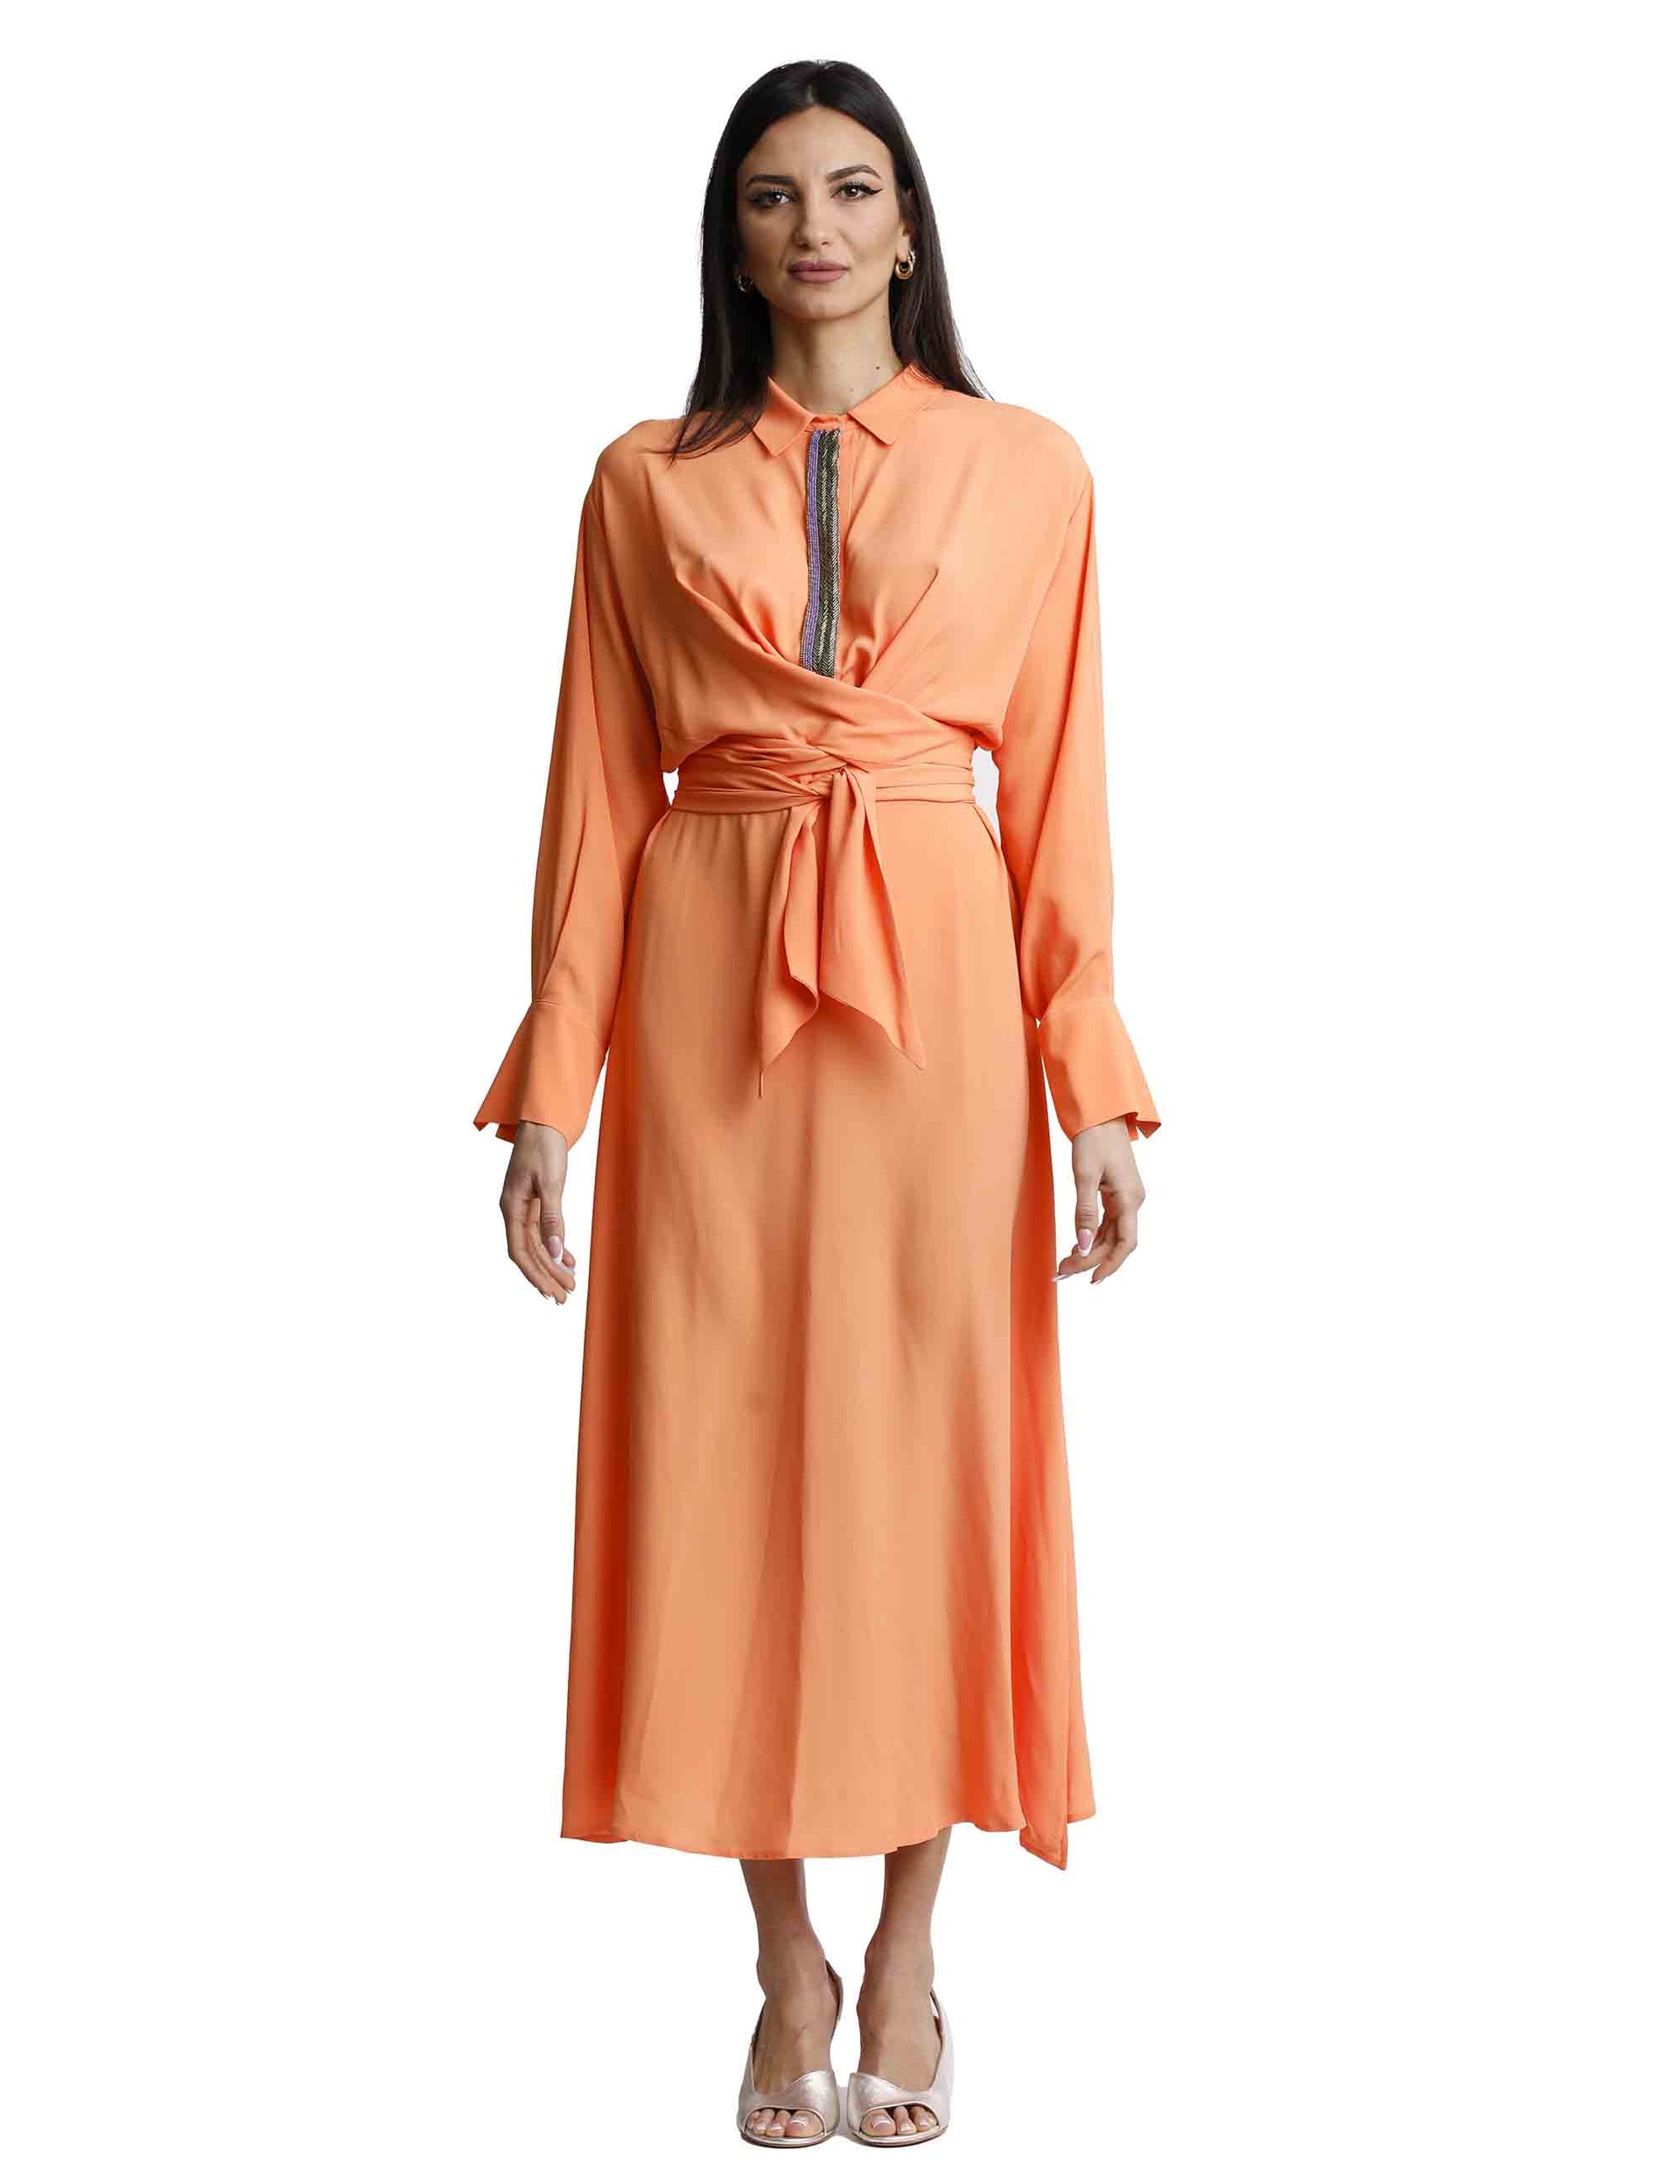 Fluide Crepe women's long dresses in orange silk with draping